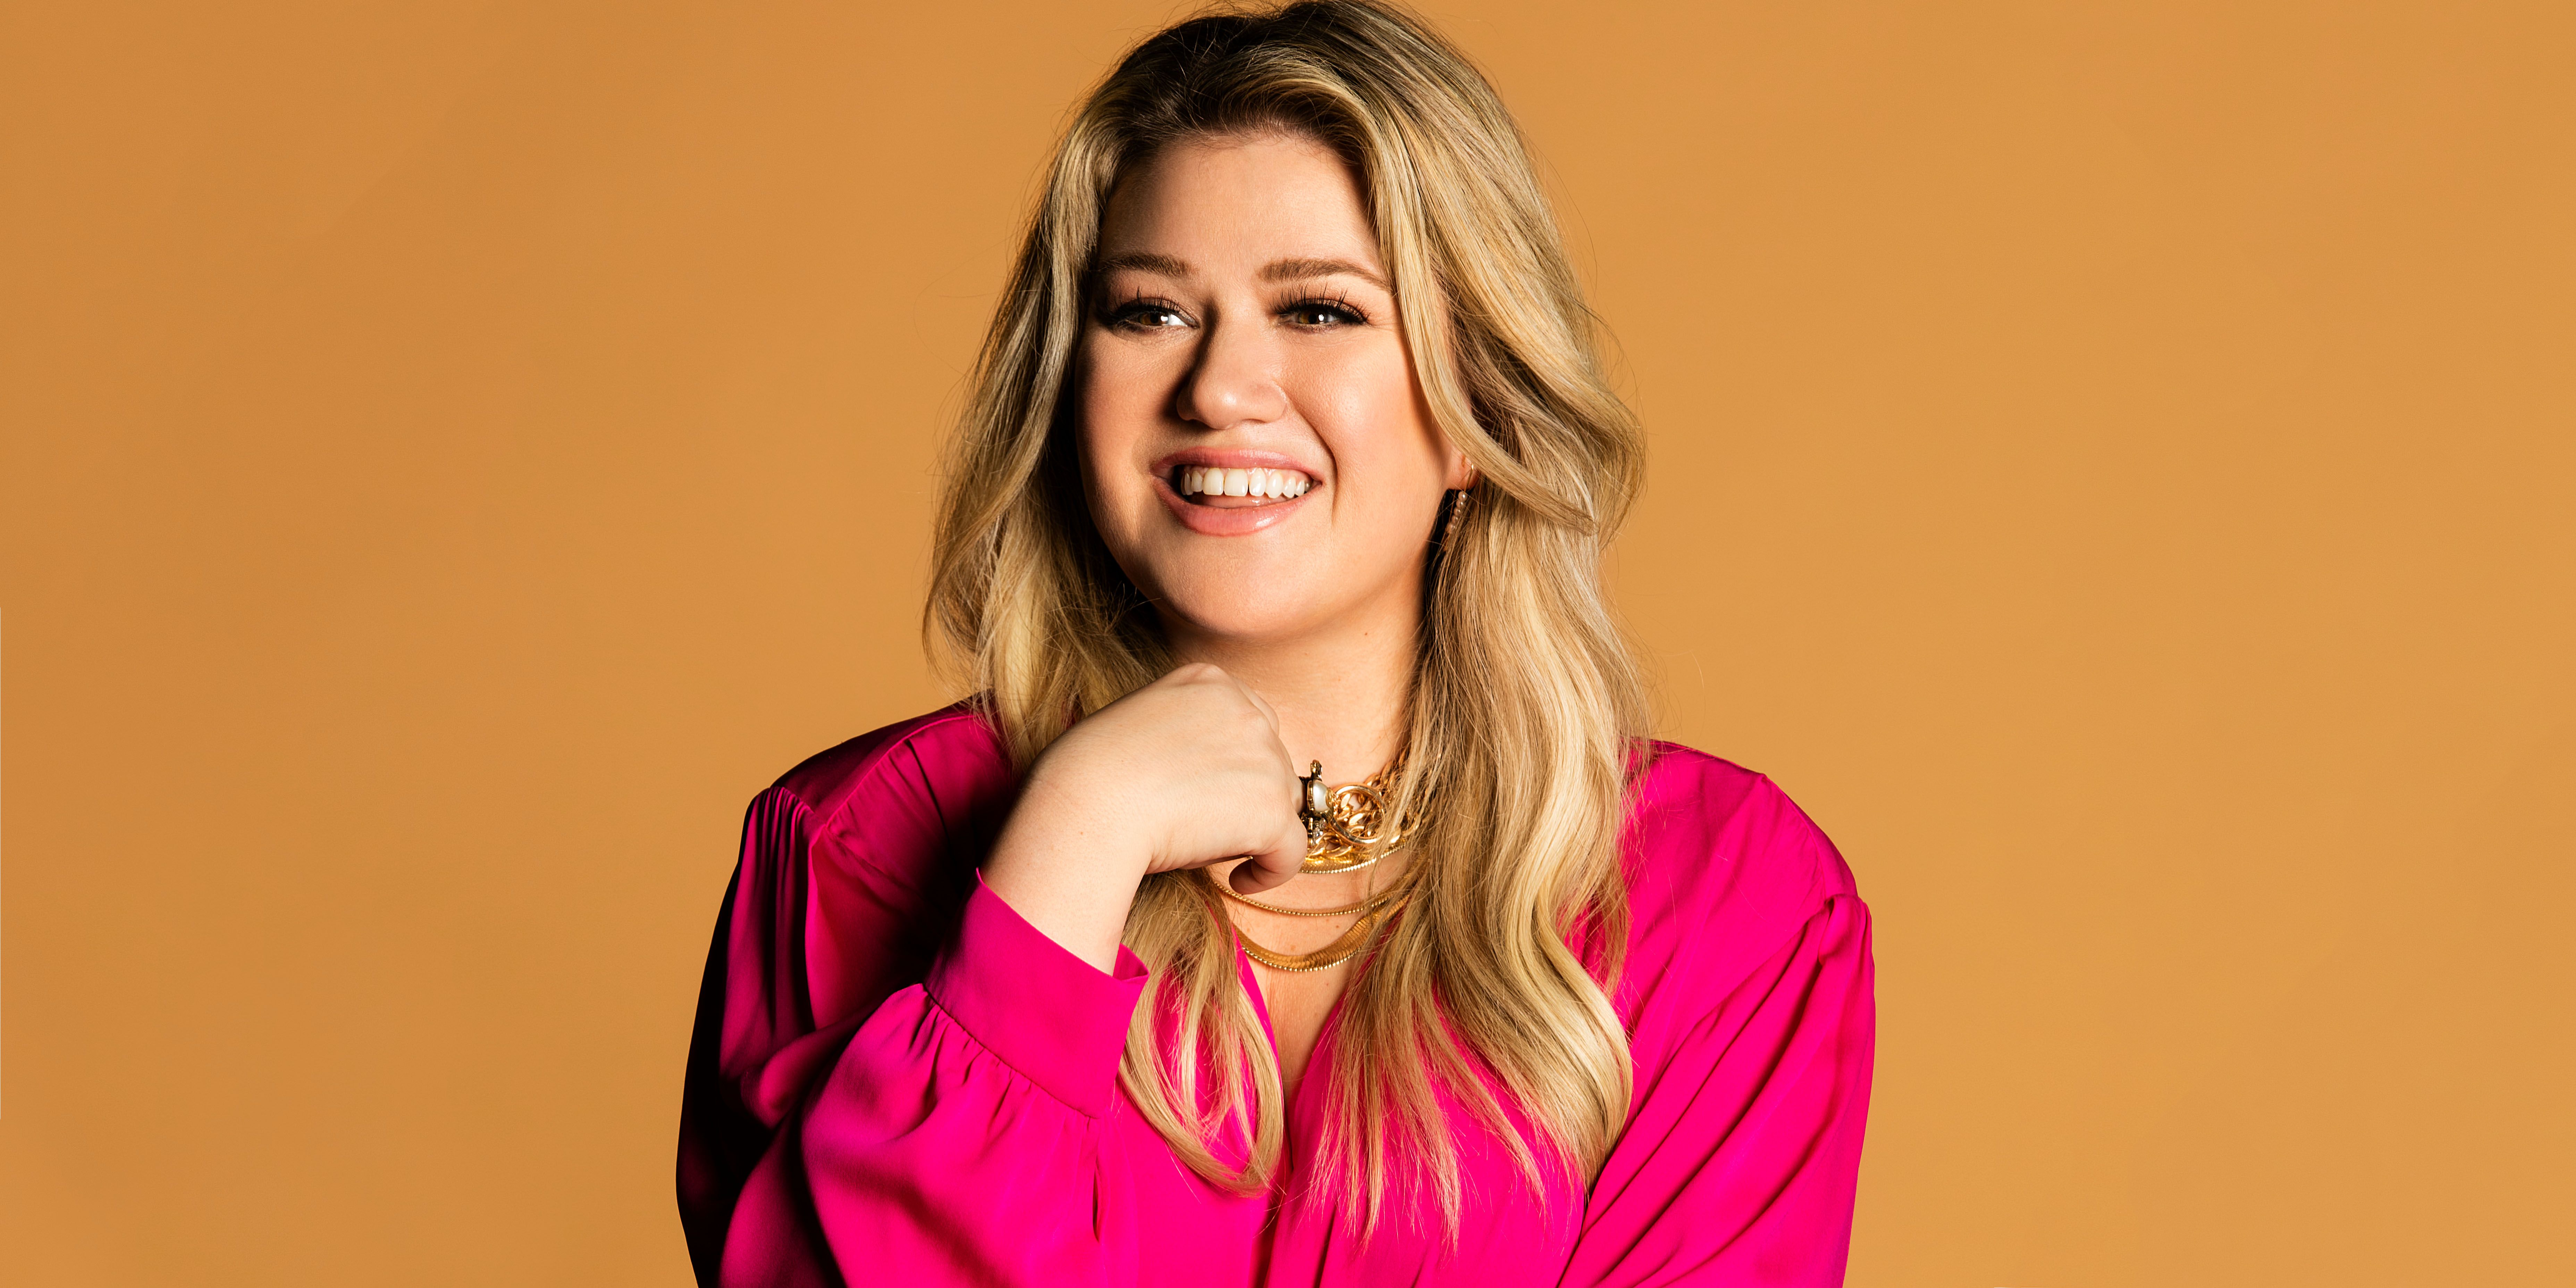 Kelly Clarkson on Her Candid New Post-Divorce Album, ‘Chemistry’: ‘If This Helps One Person Through the Grieving Process, It’s Worth It’